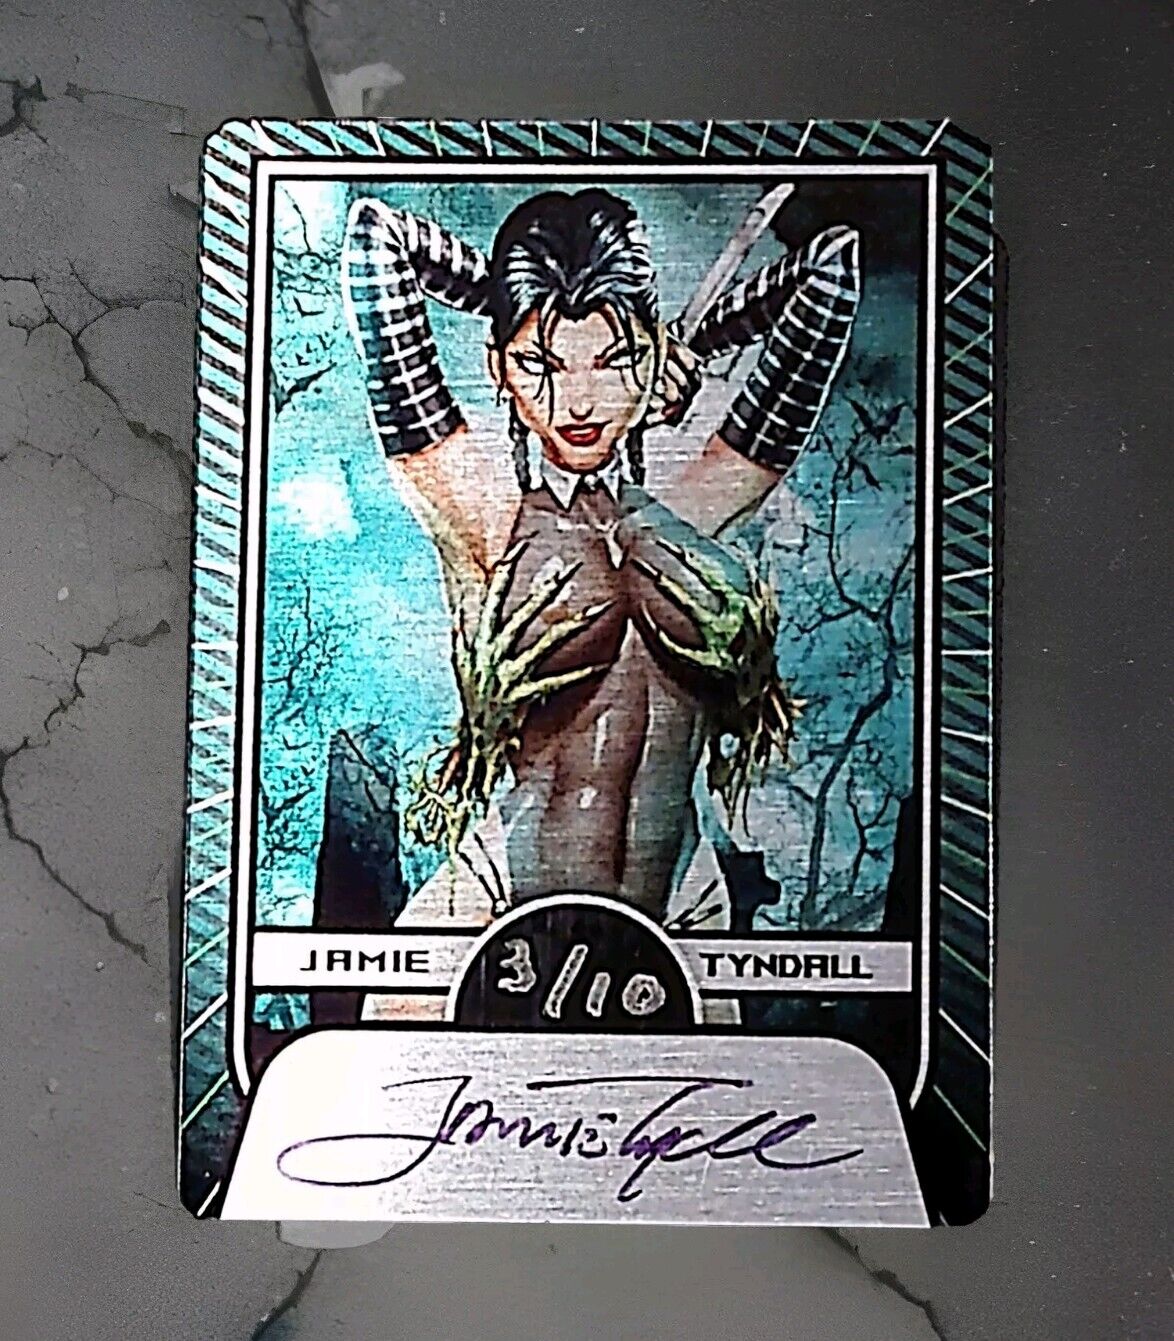 Wednesday Addams Jamie Tyndall Signed and Numbered Metal Trading Card #3/10 